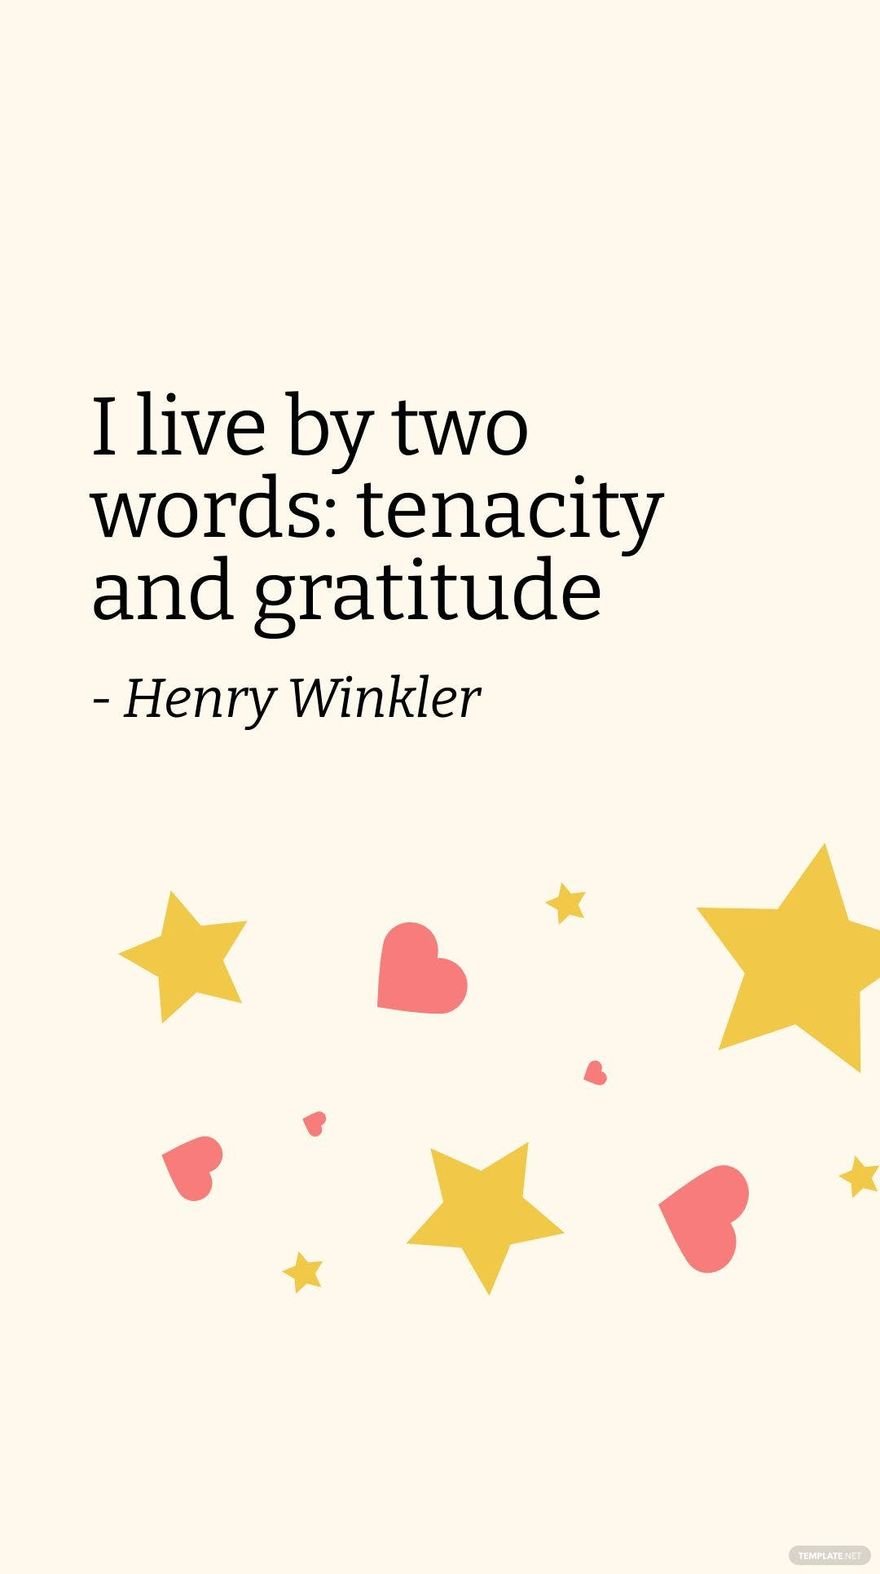 Free Henry Winkler - I live by two words: tenacity and gratitude